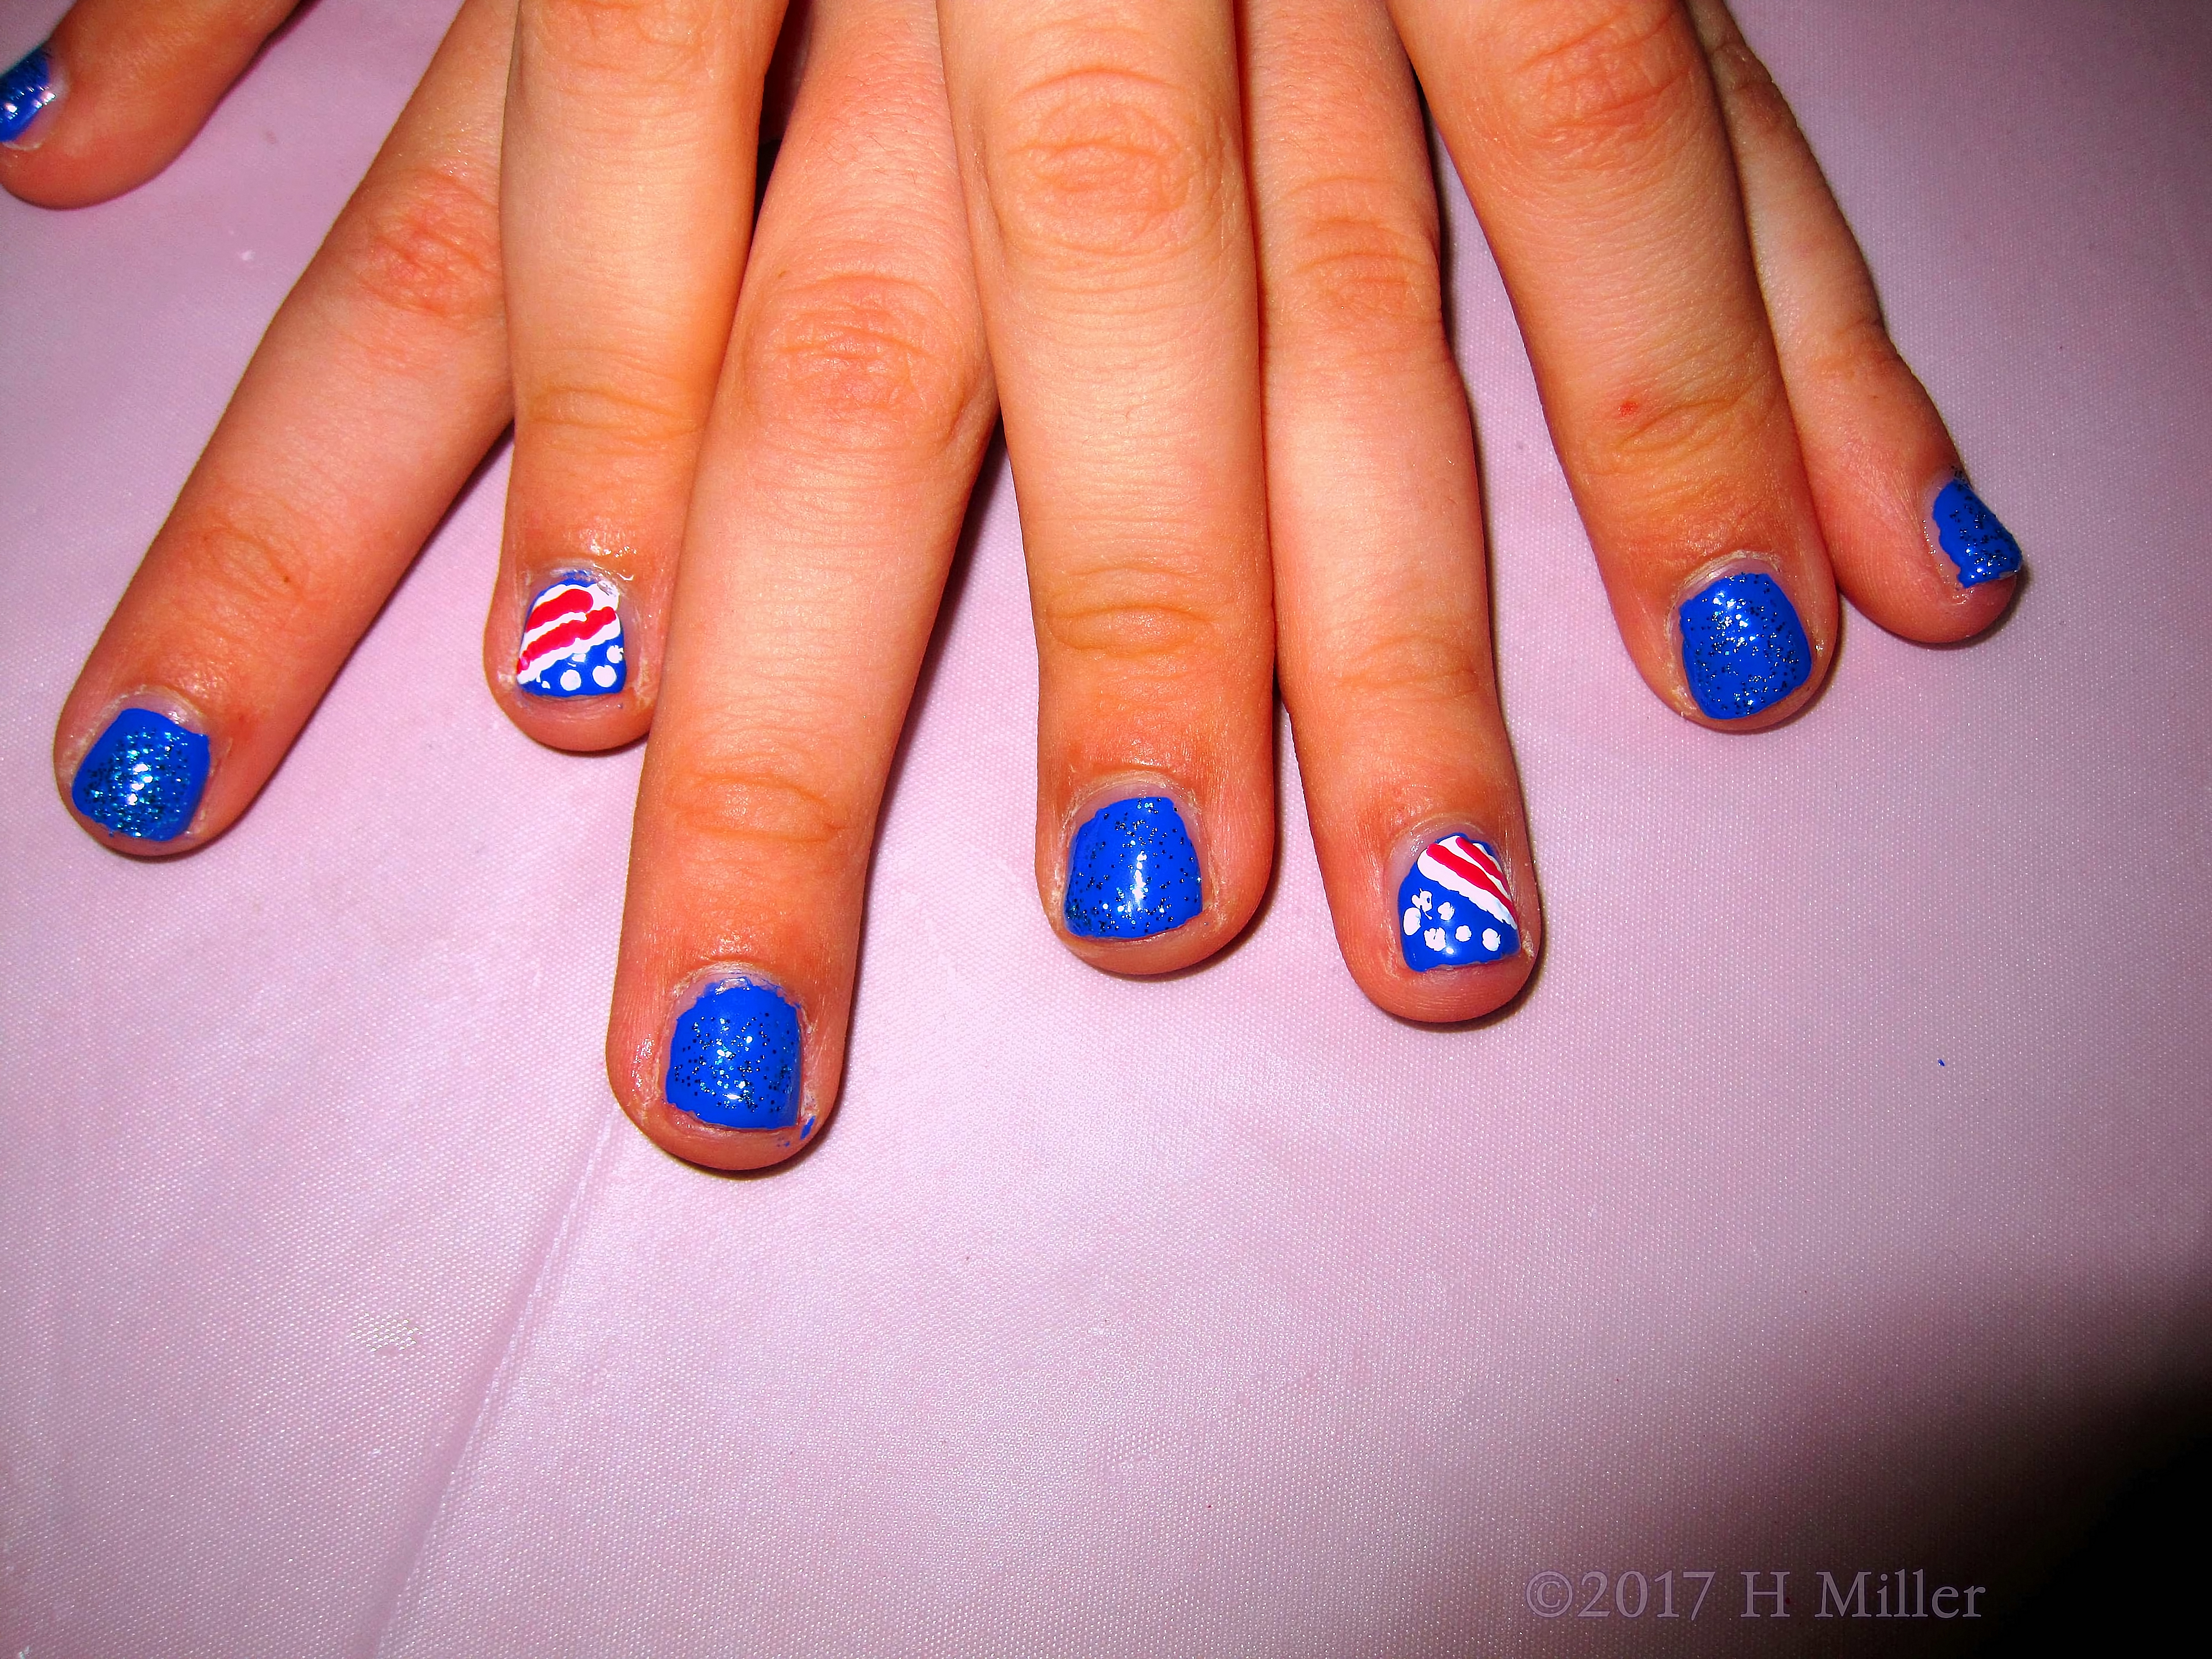 Bright Red White And Blue American Flag Nail Design With Glittery Blue Polish For This Girls Manicure!